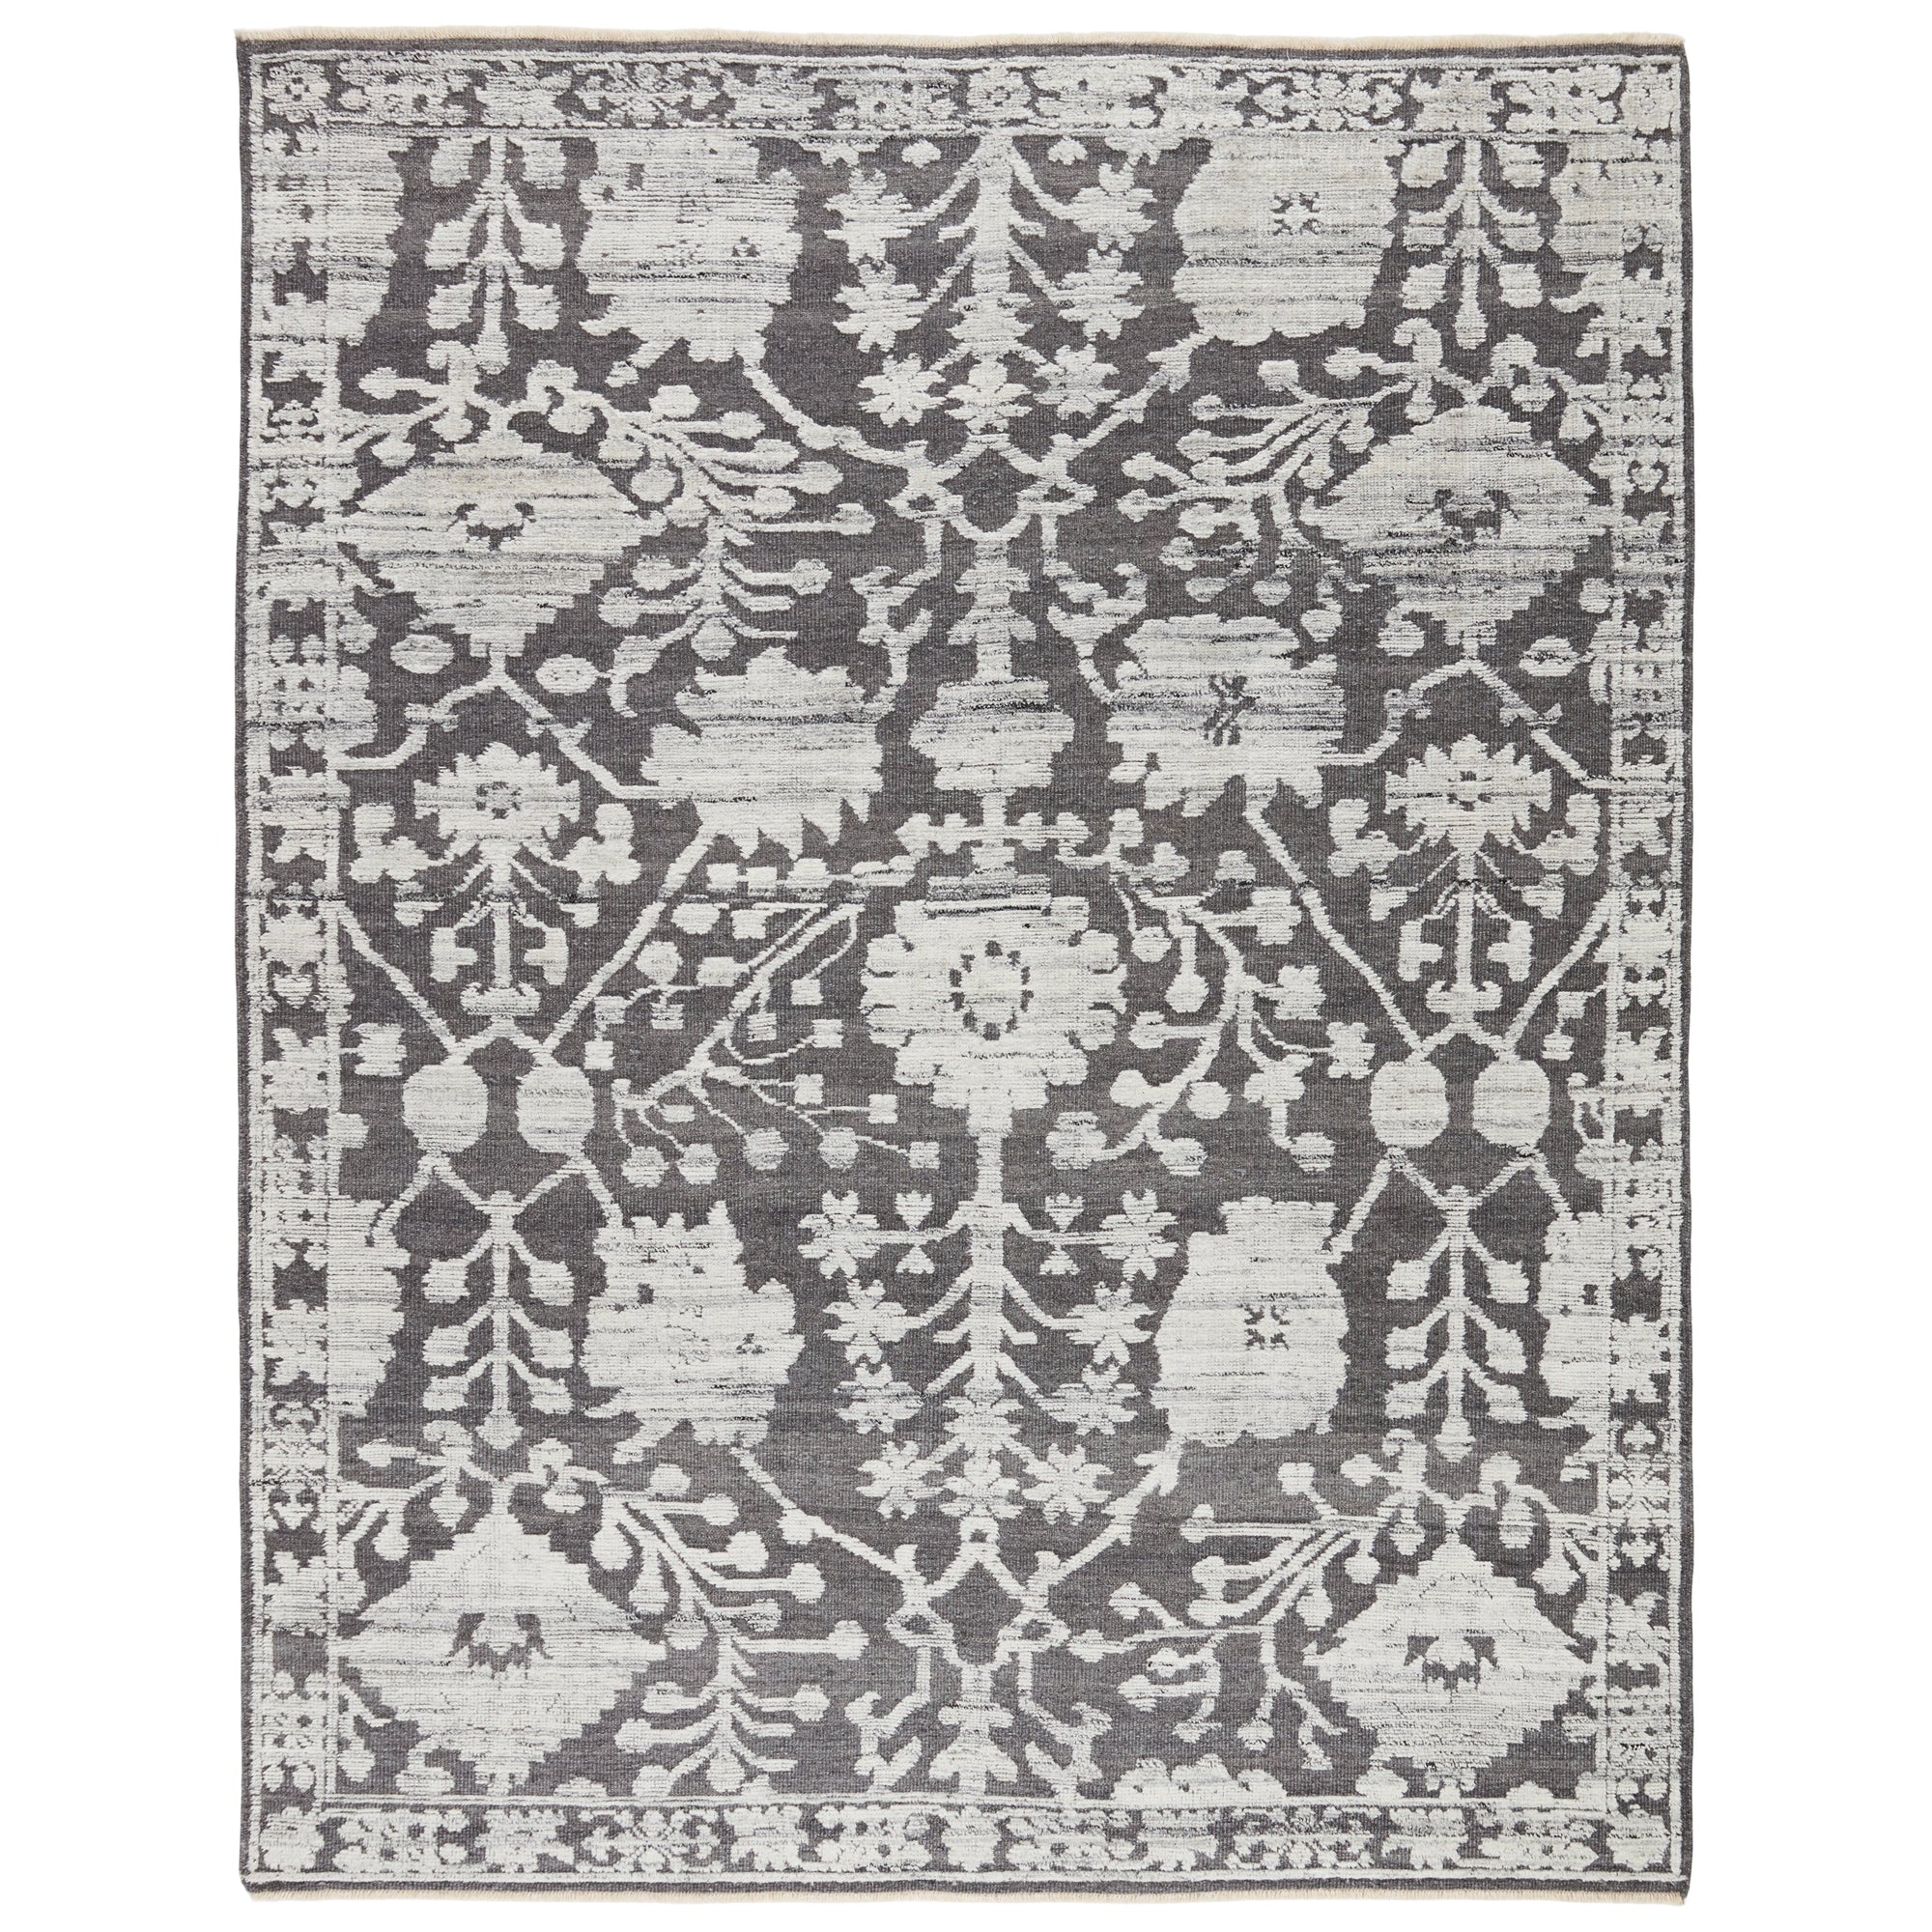 Rugs by Roo | Jaipur Living Riona Hand-Knotted Floral Gray White Area Rug-RUG146556